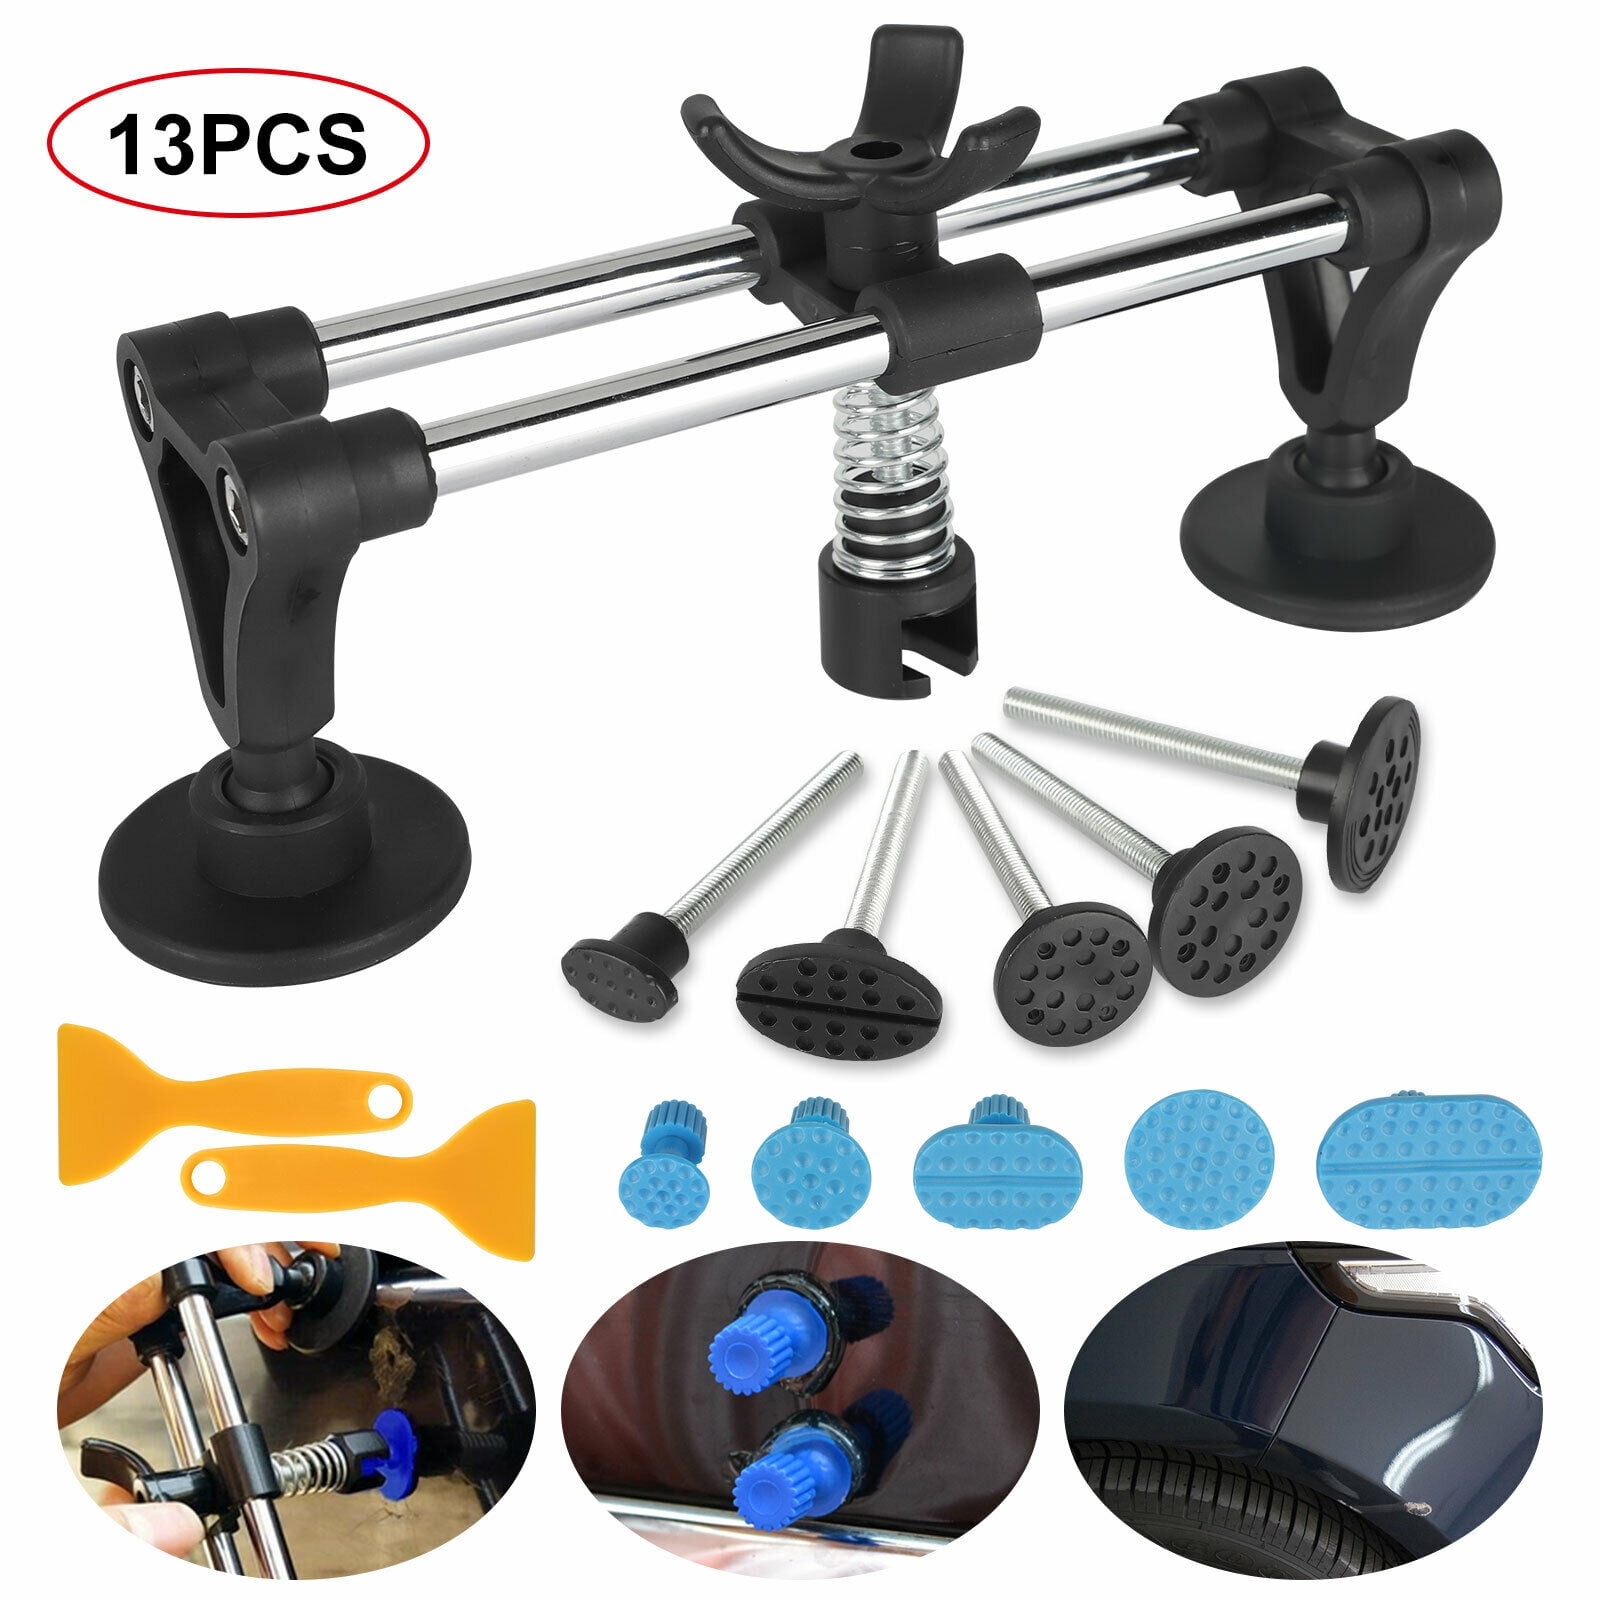 Auto Car Body Dent Ding Remover Repair Puller Sucker Panel Suction Cup Tool Kit 